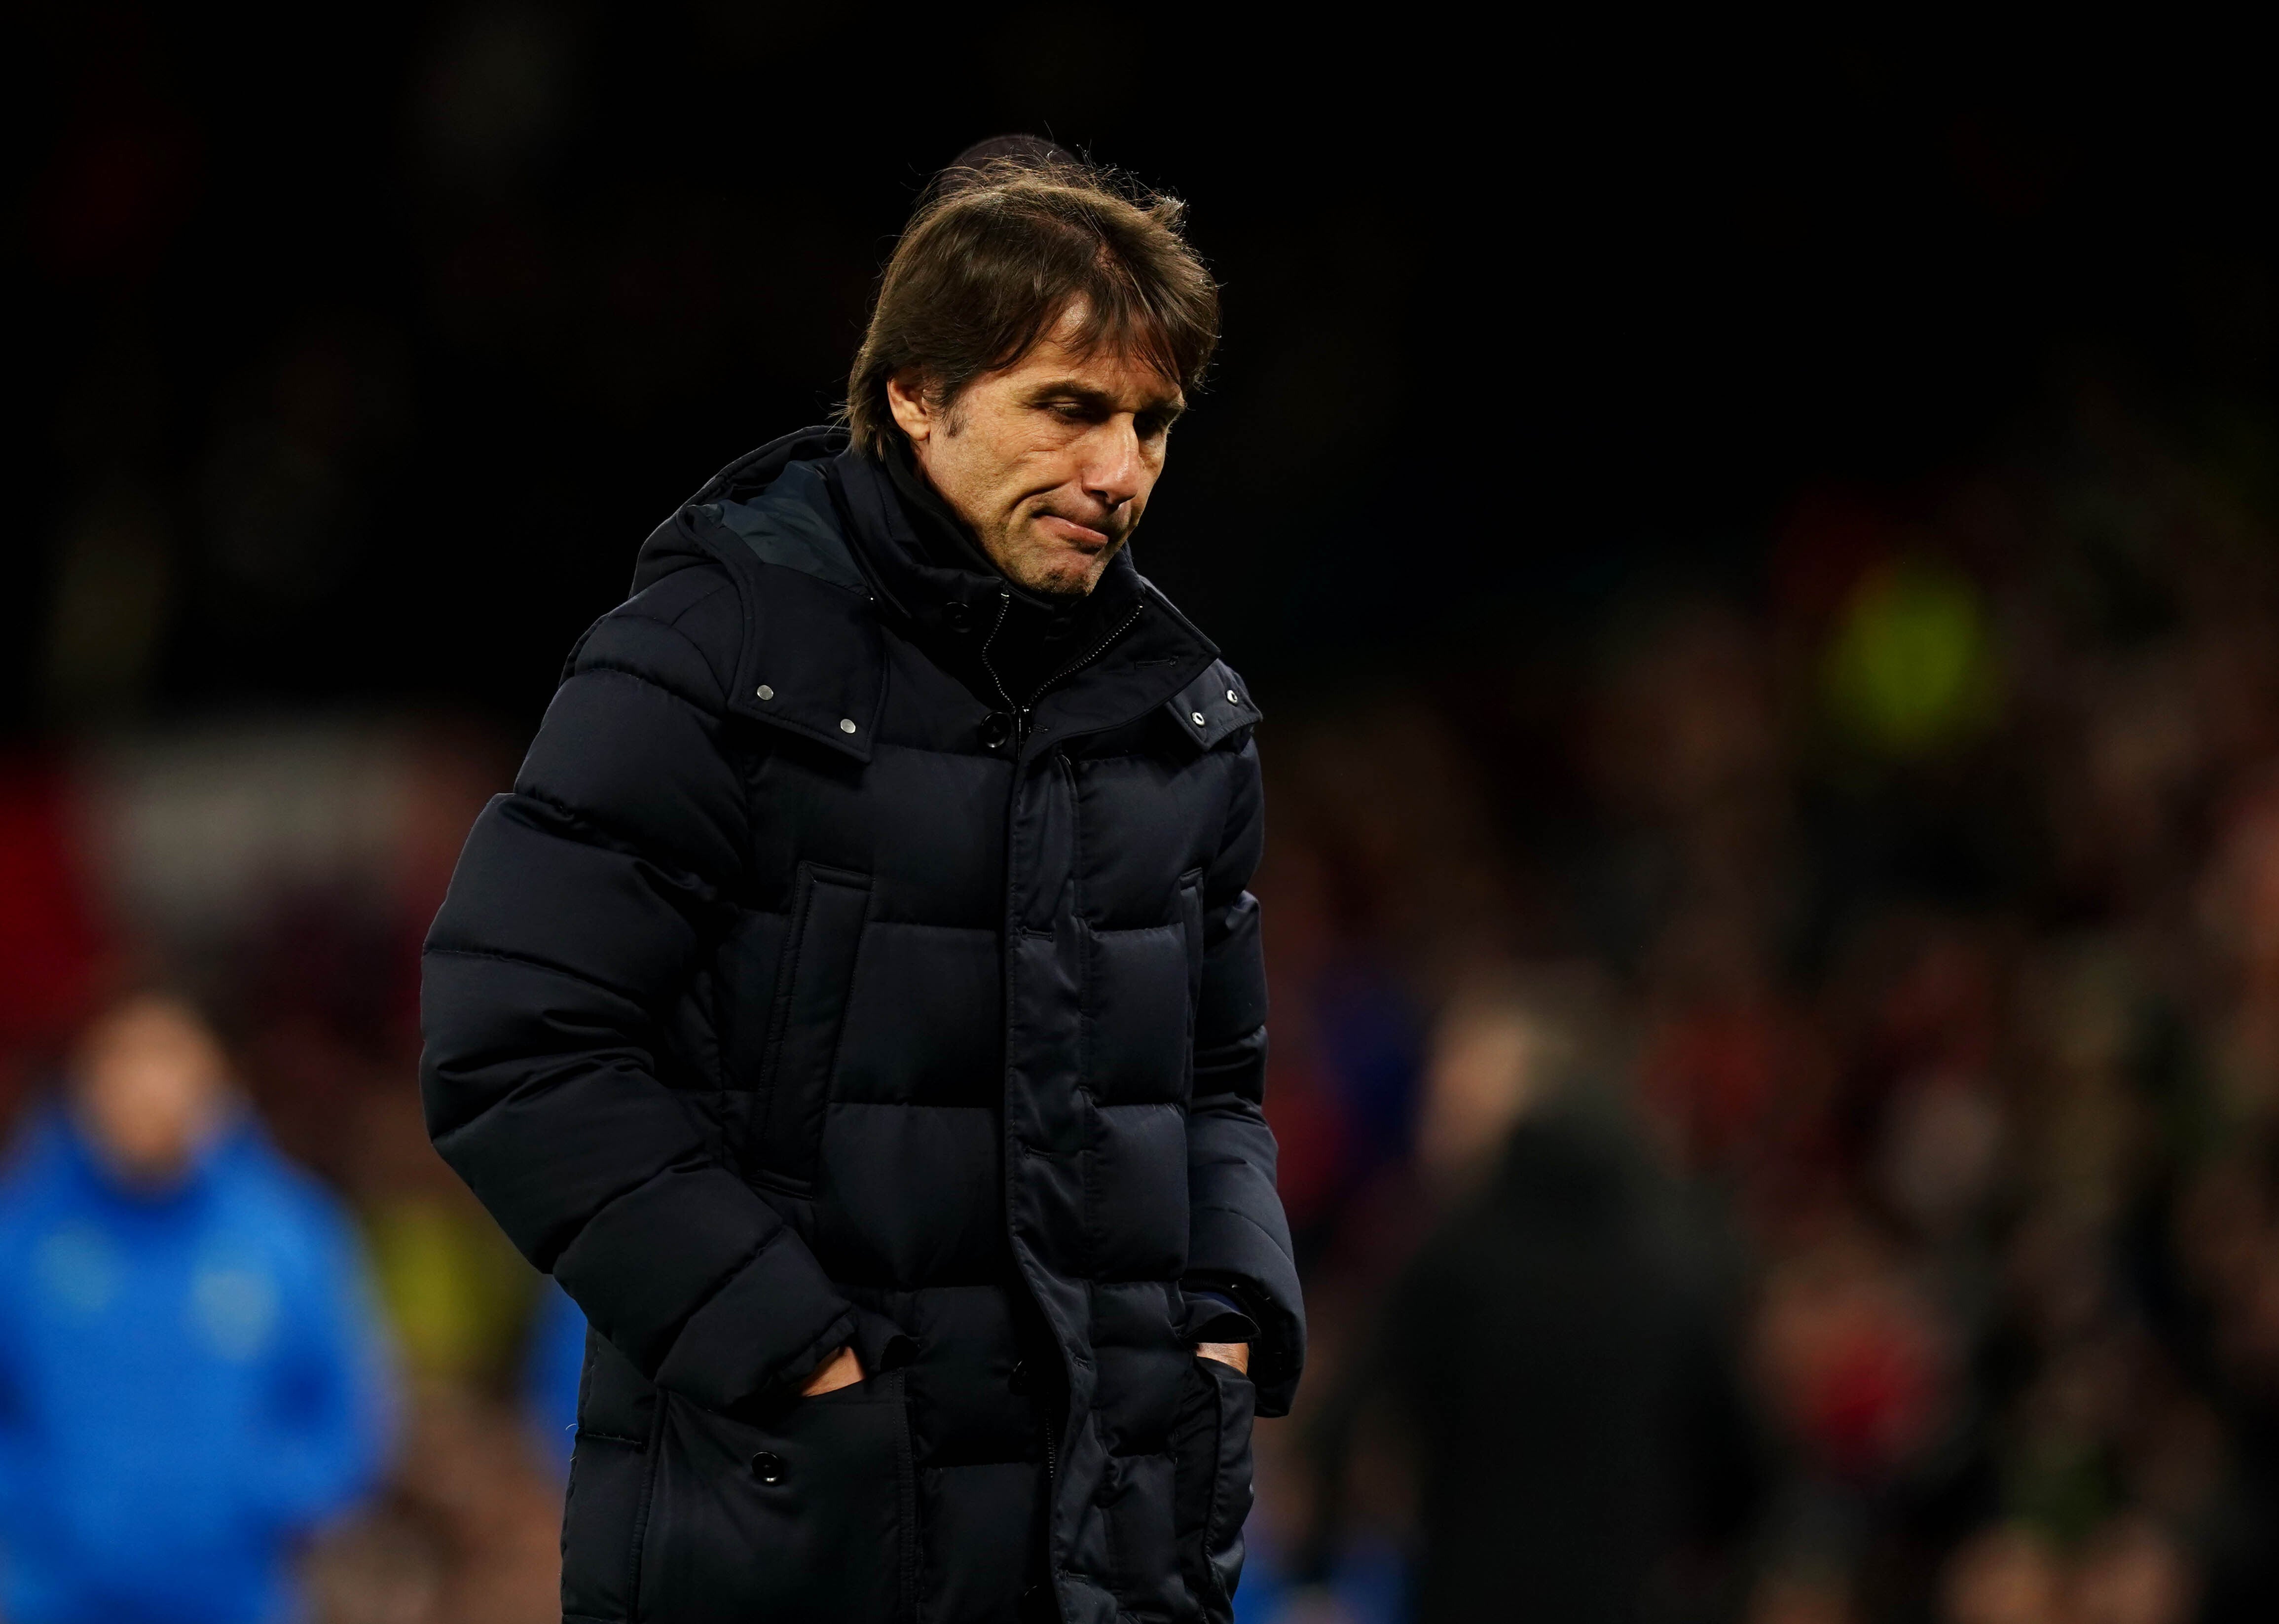 Antonio Conte reign at Spurs has been turbulent